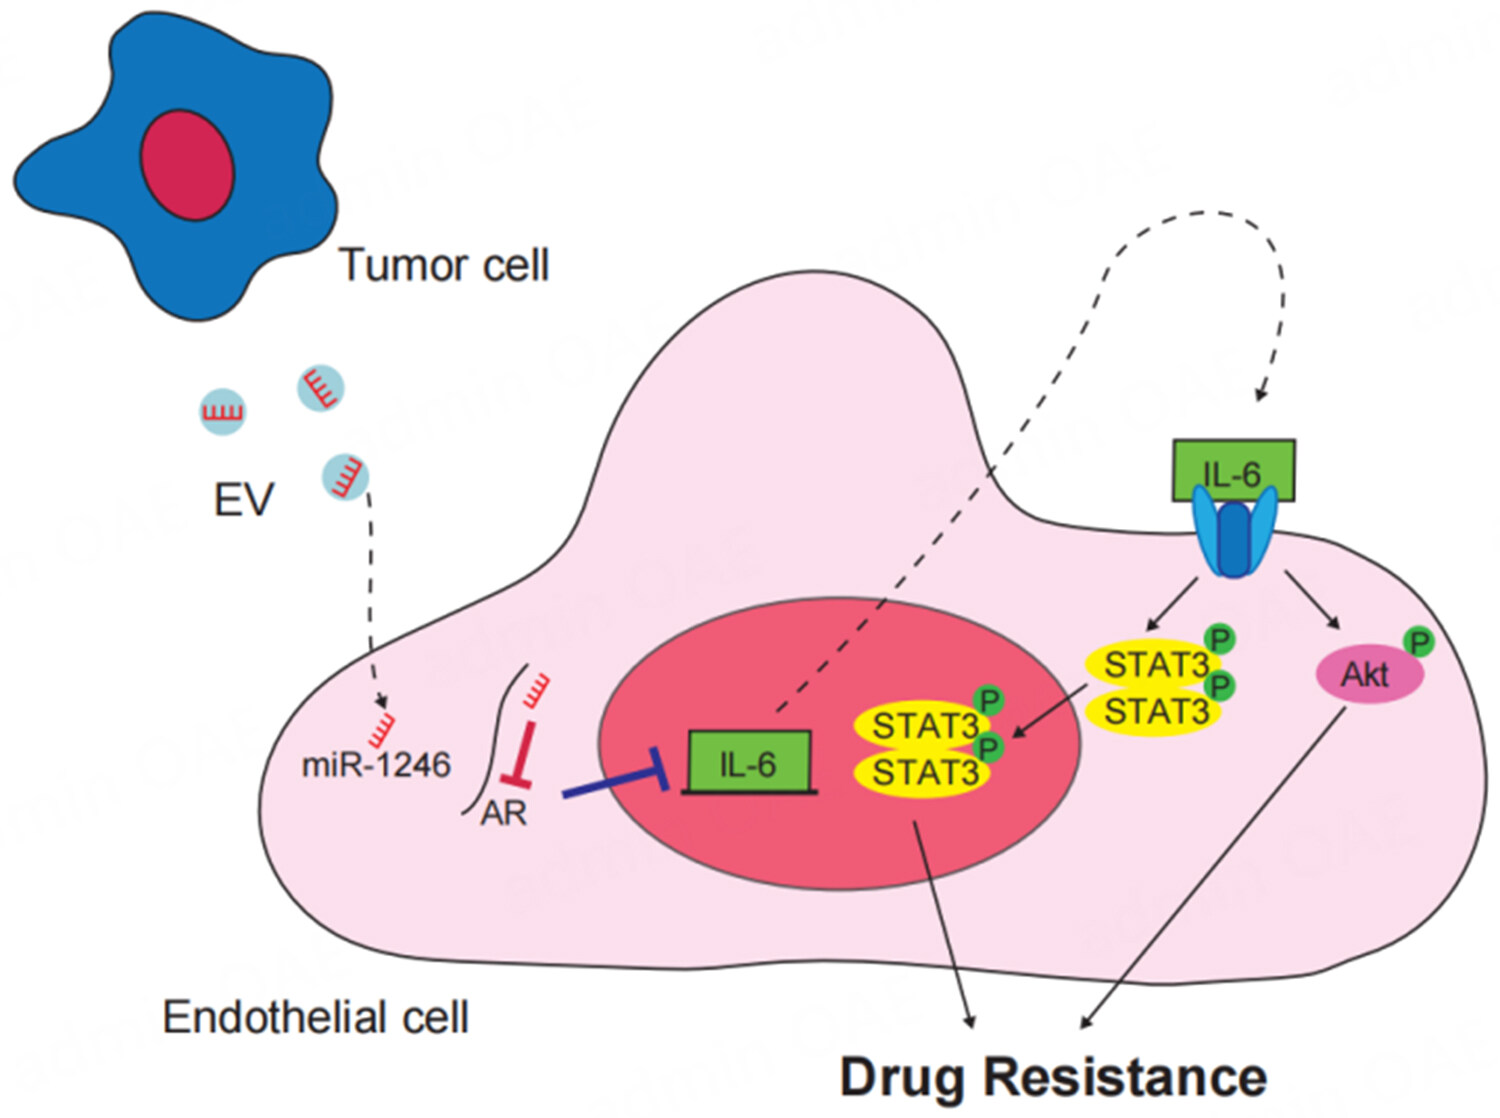 Acquisition of drug resistance in endothelial cells by tumor-derived extracellular vesicles and cancer progression